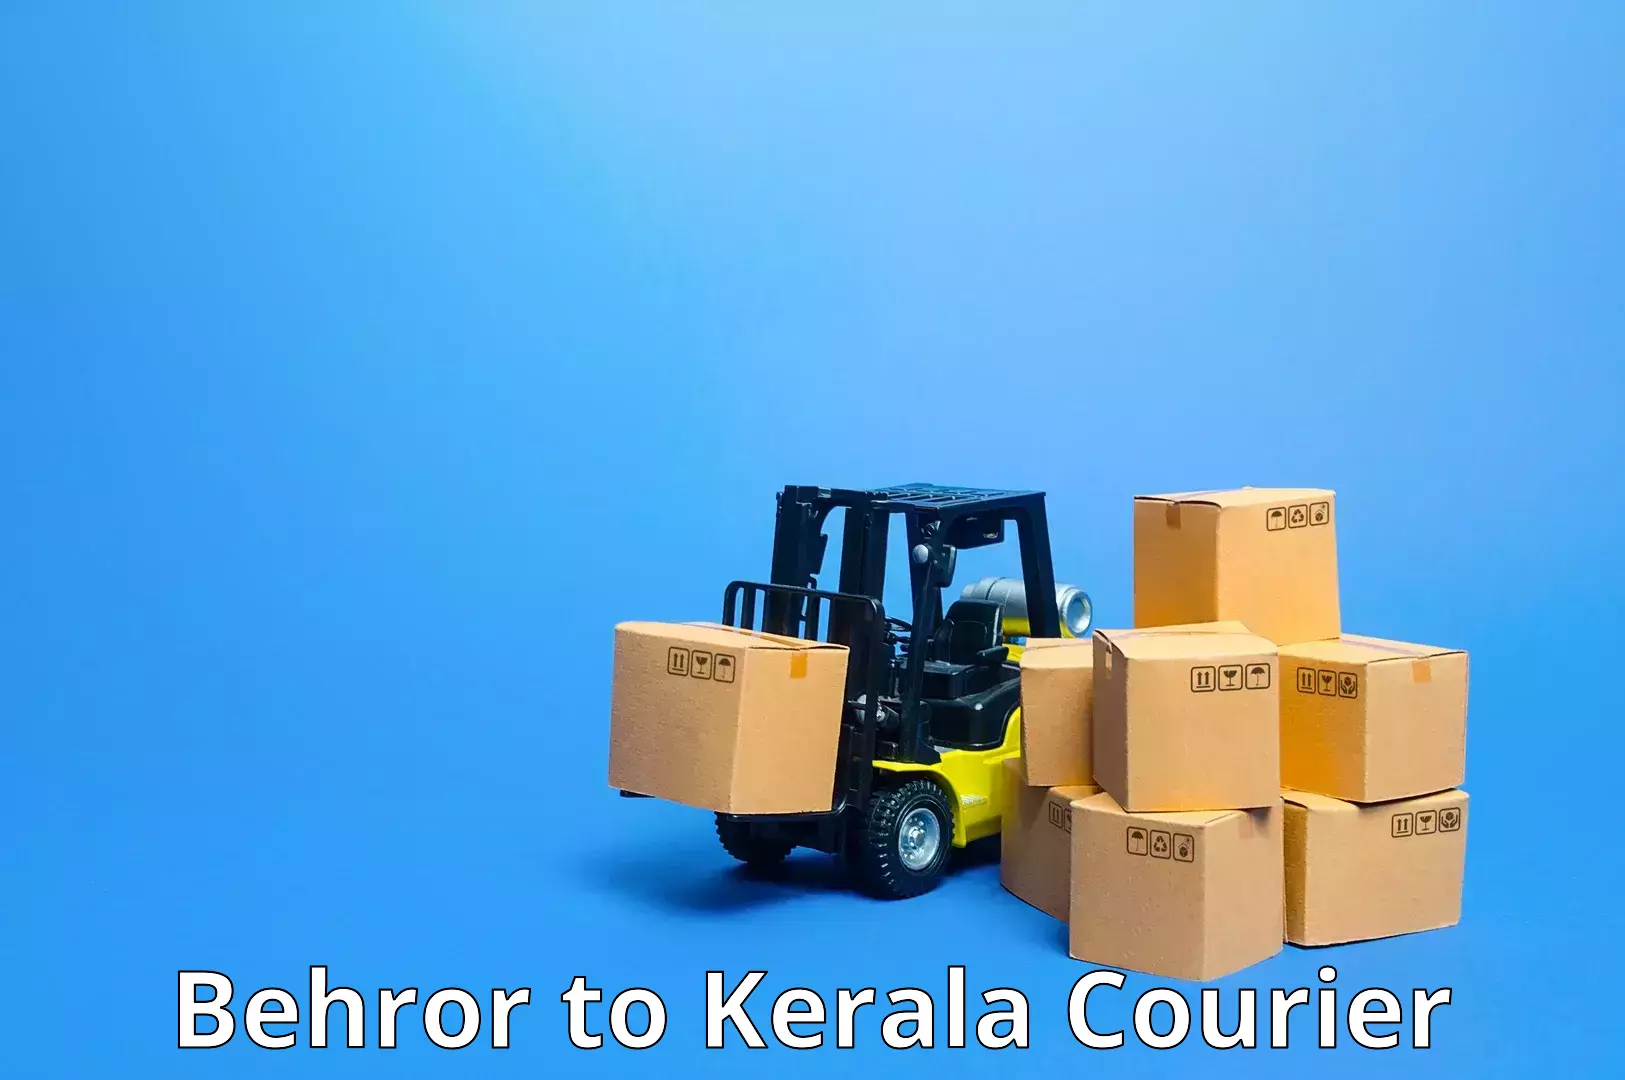 Tech-enabled shipping Behror to Perinthalmanna